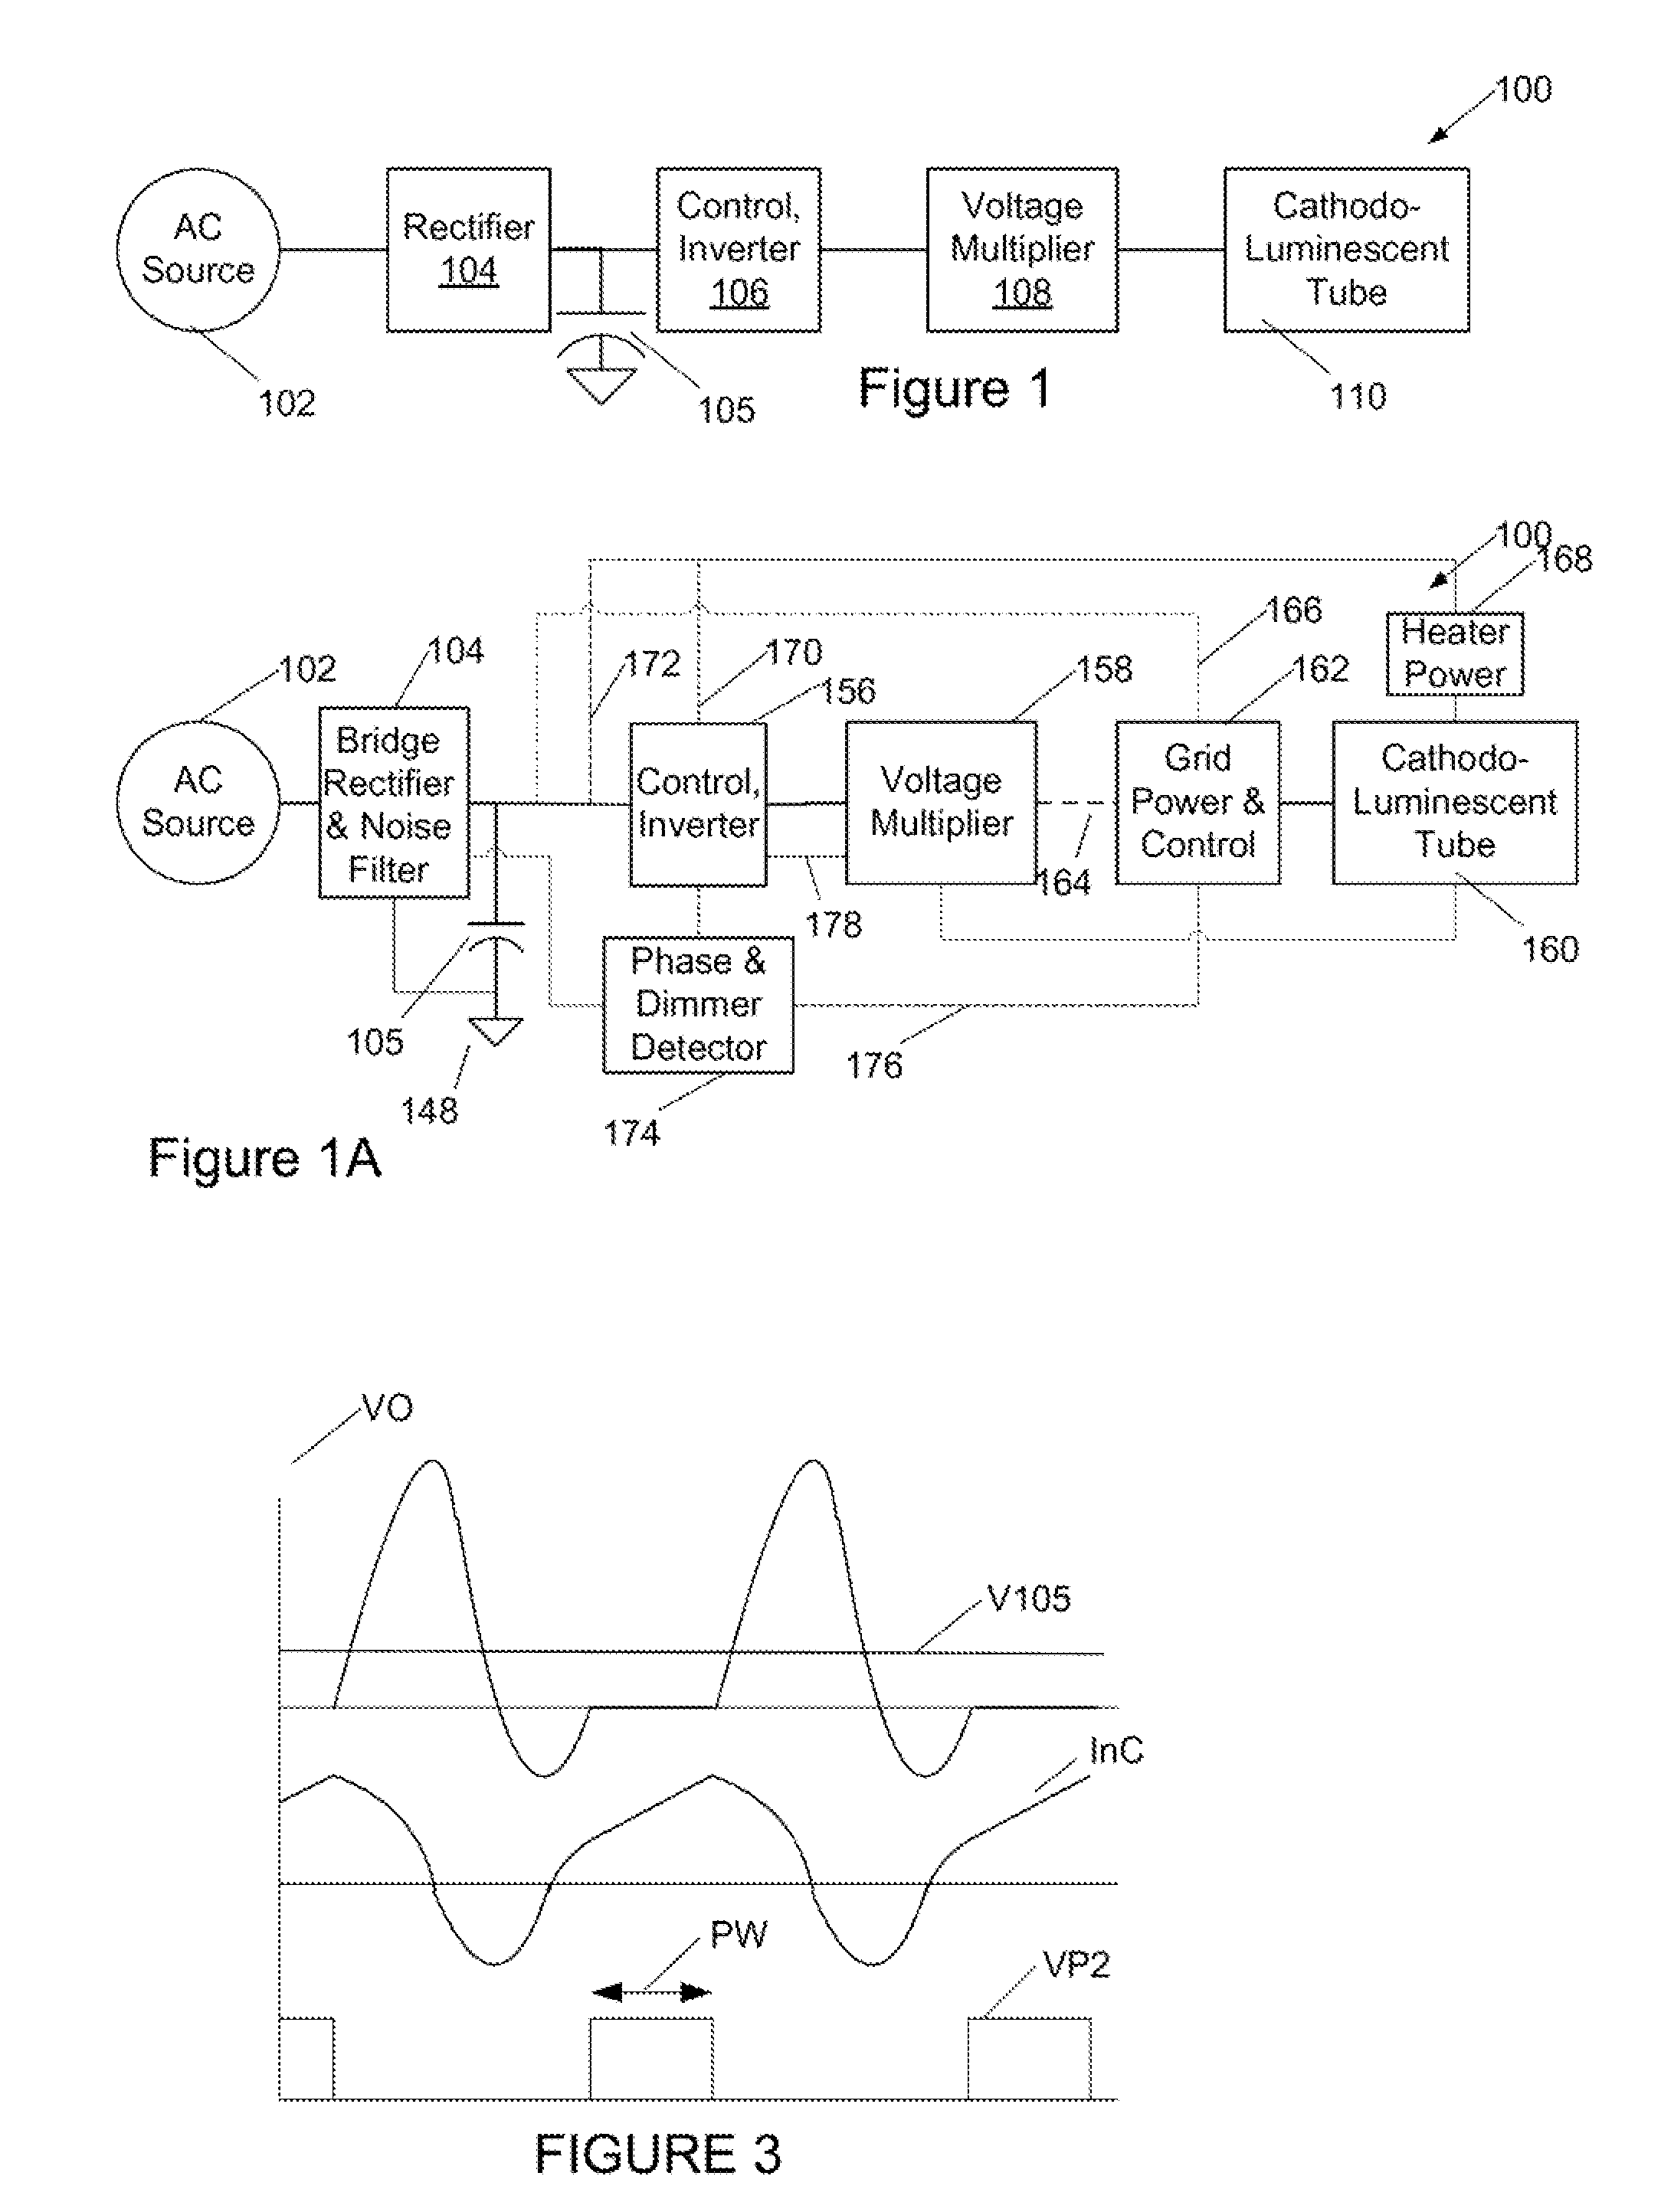 System and apparatus for cathodoluminescent lighting